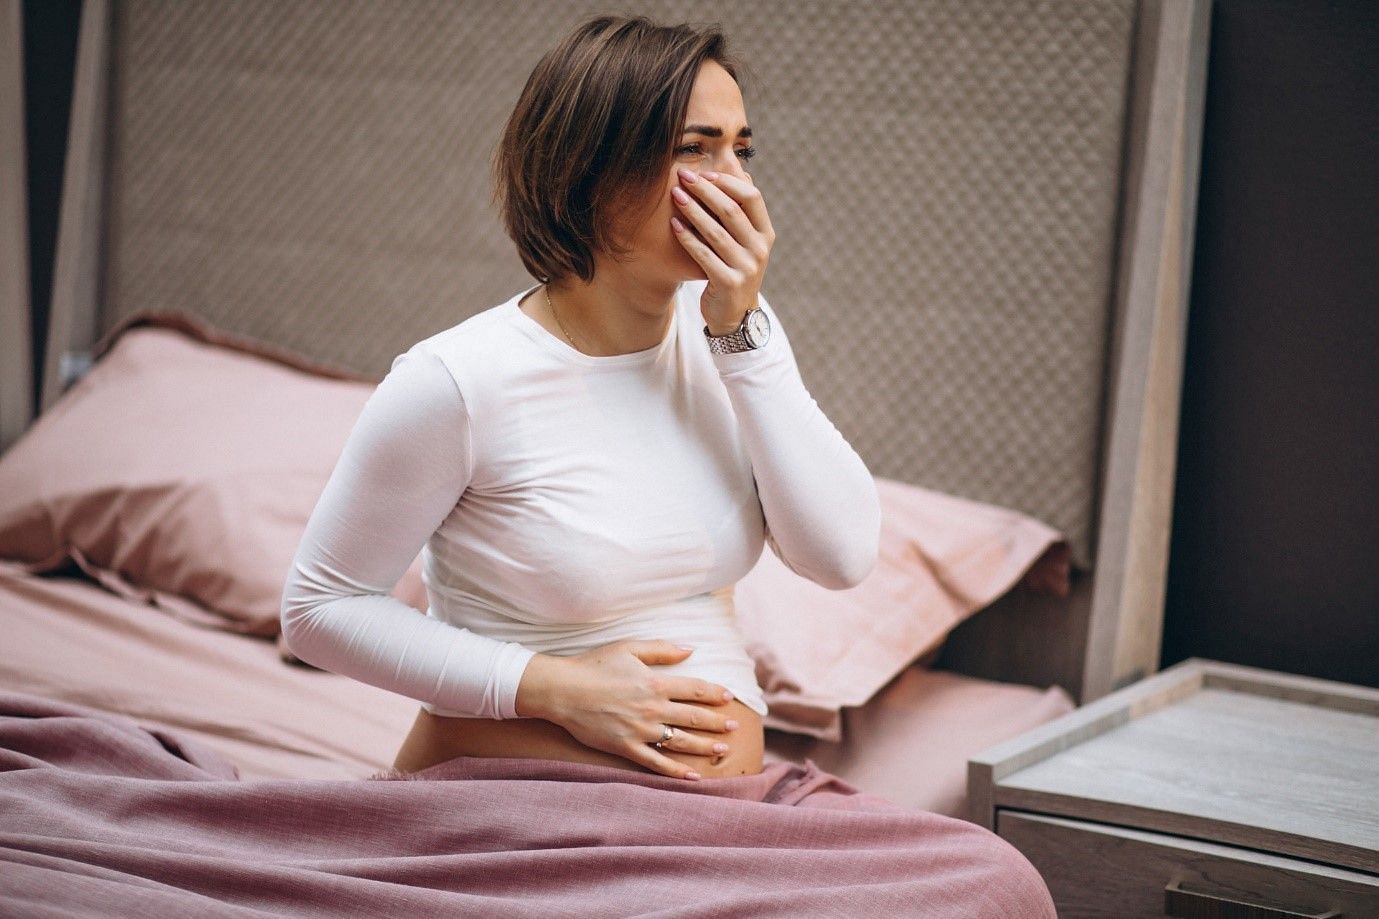 Why do we need cold remedies for pregnancy? (image by senivpetra on freepik)